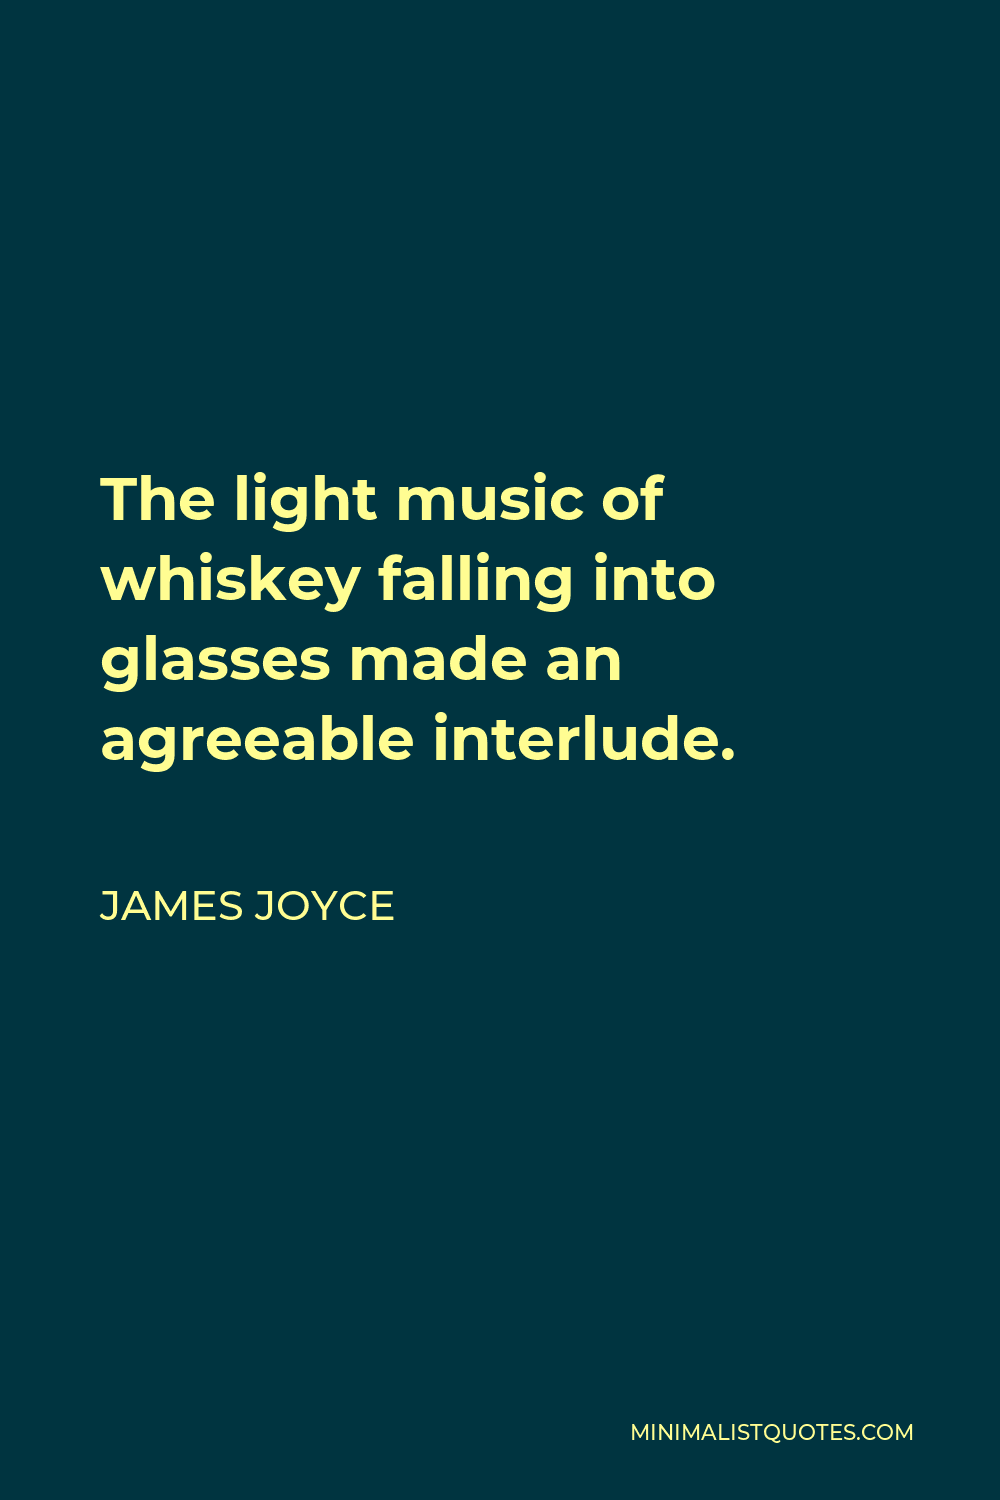 James Joyce Quote - The light music of whiskey falling into glasses made an agreeable interlude.